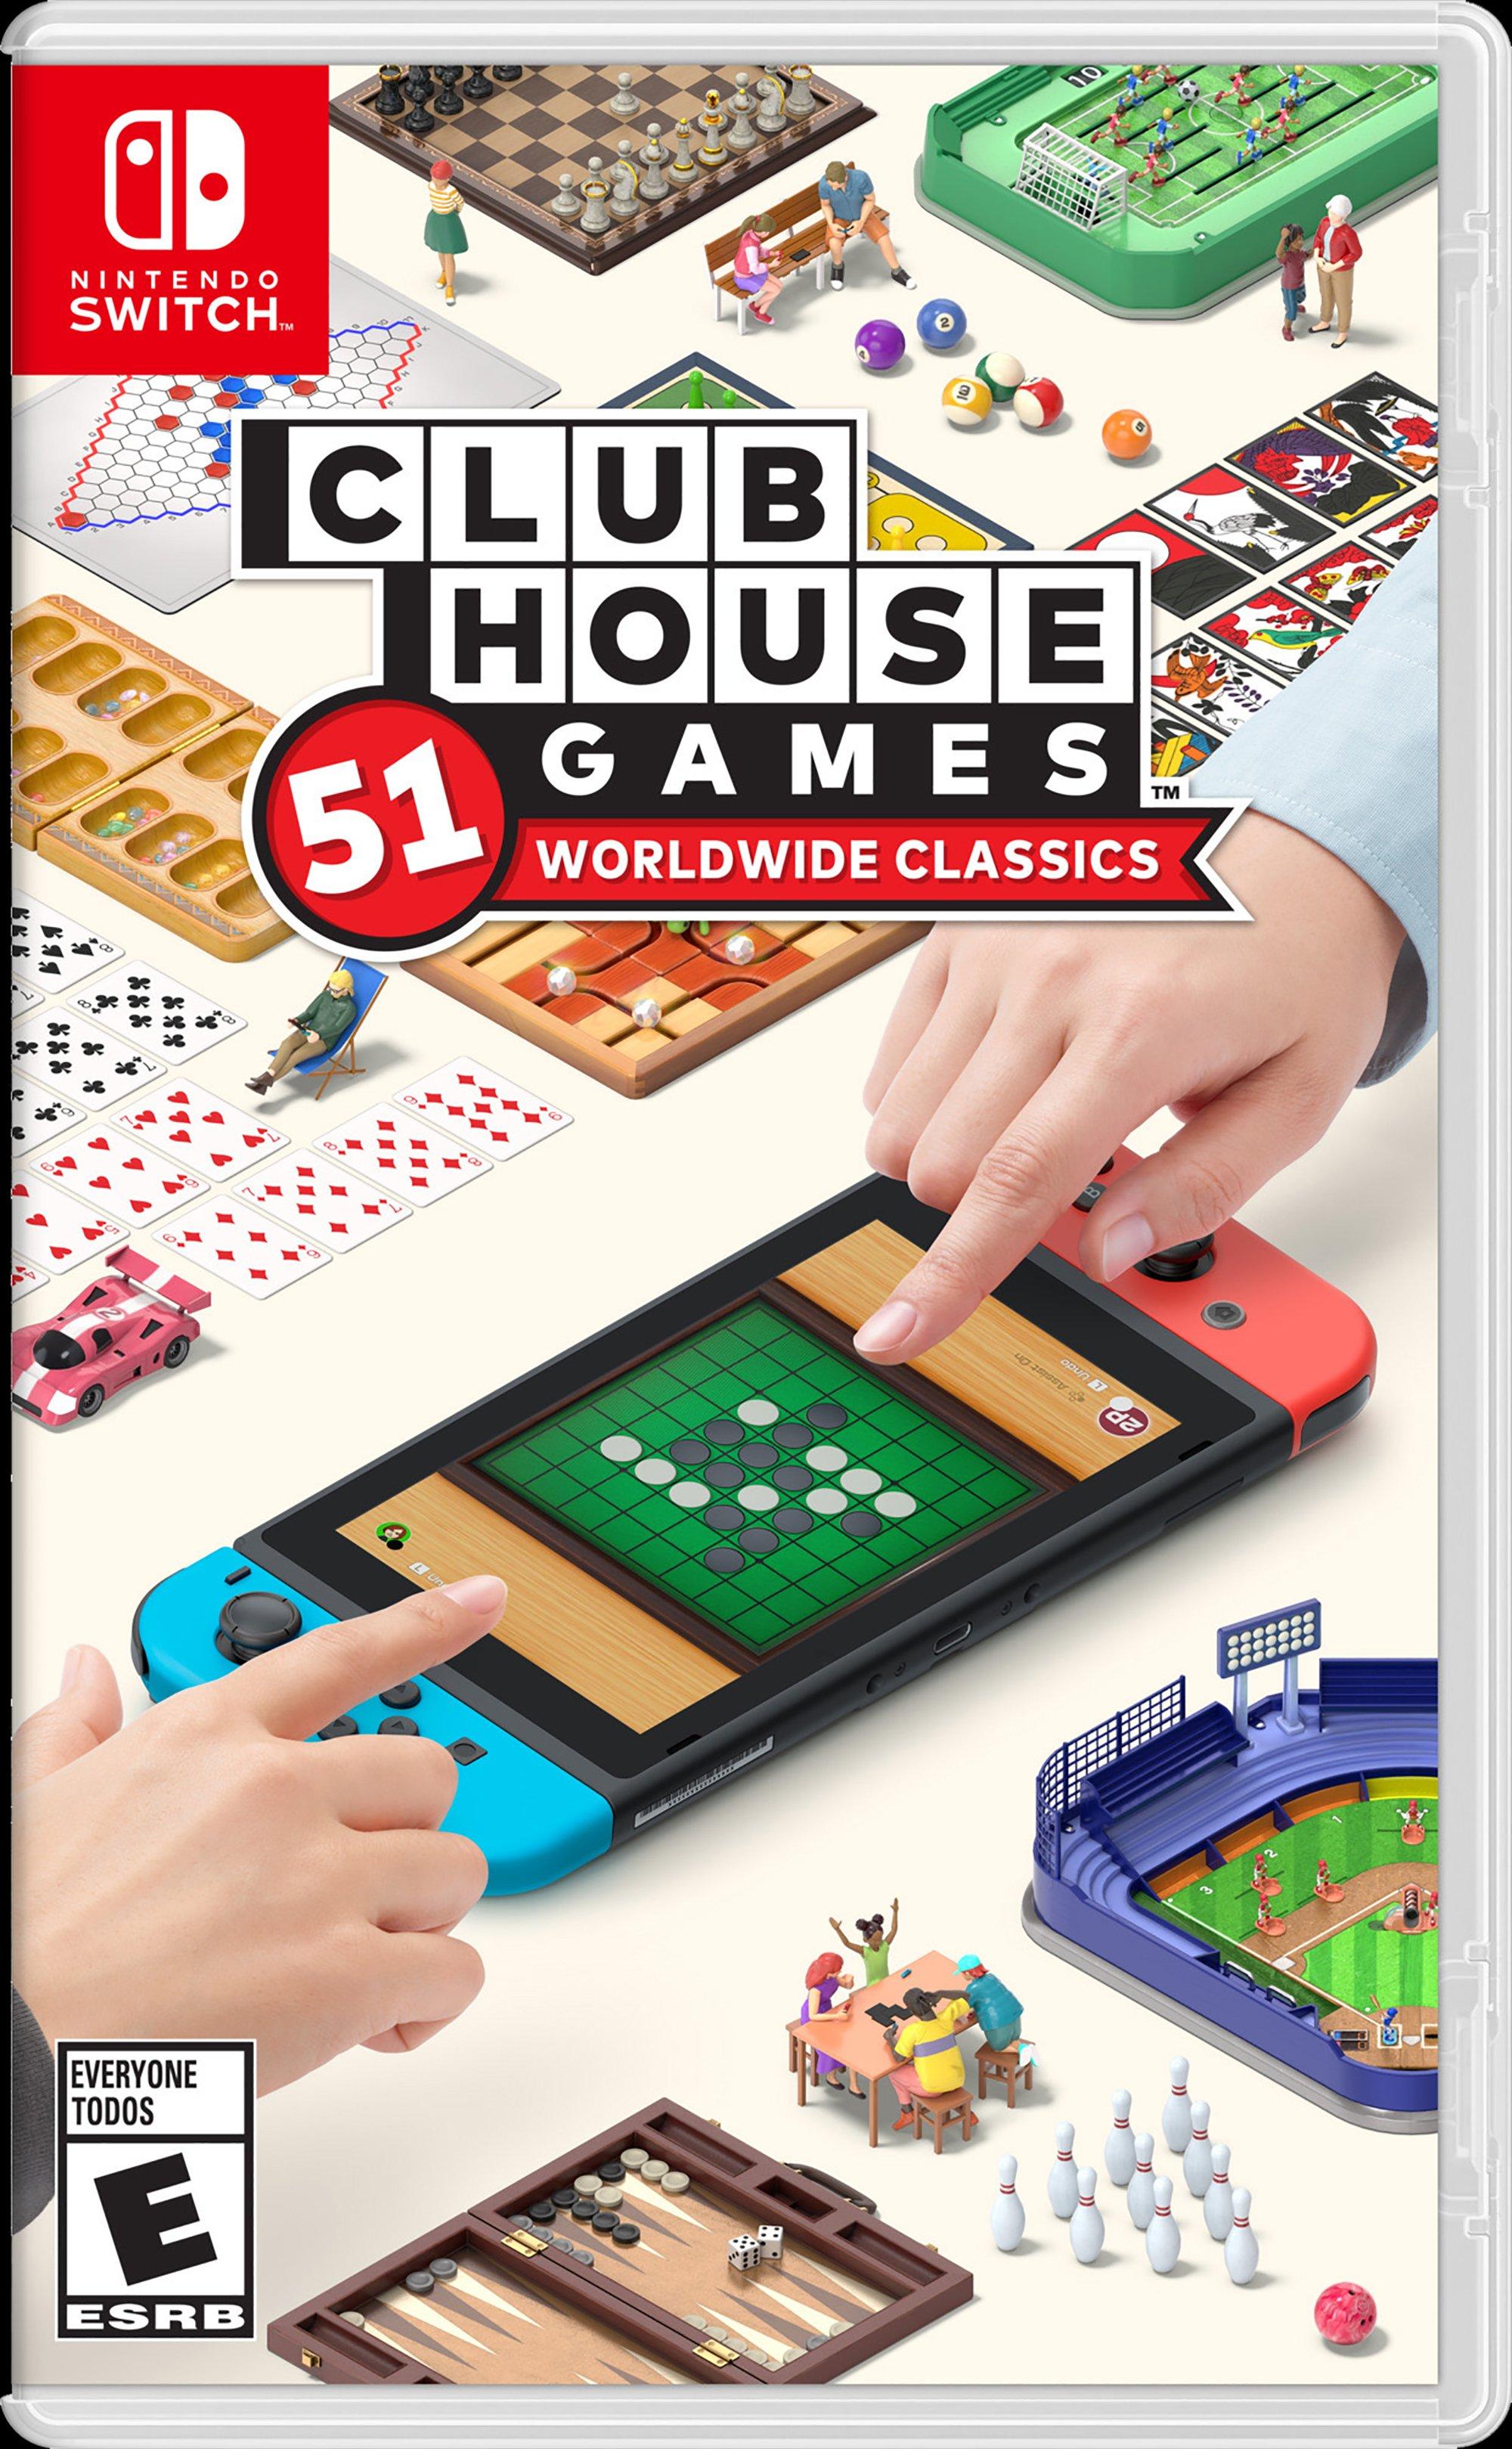 fascism Link mouth Clubhouse Games: 51 Worldwide Classics - Nintendo Switch